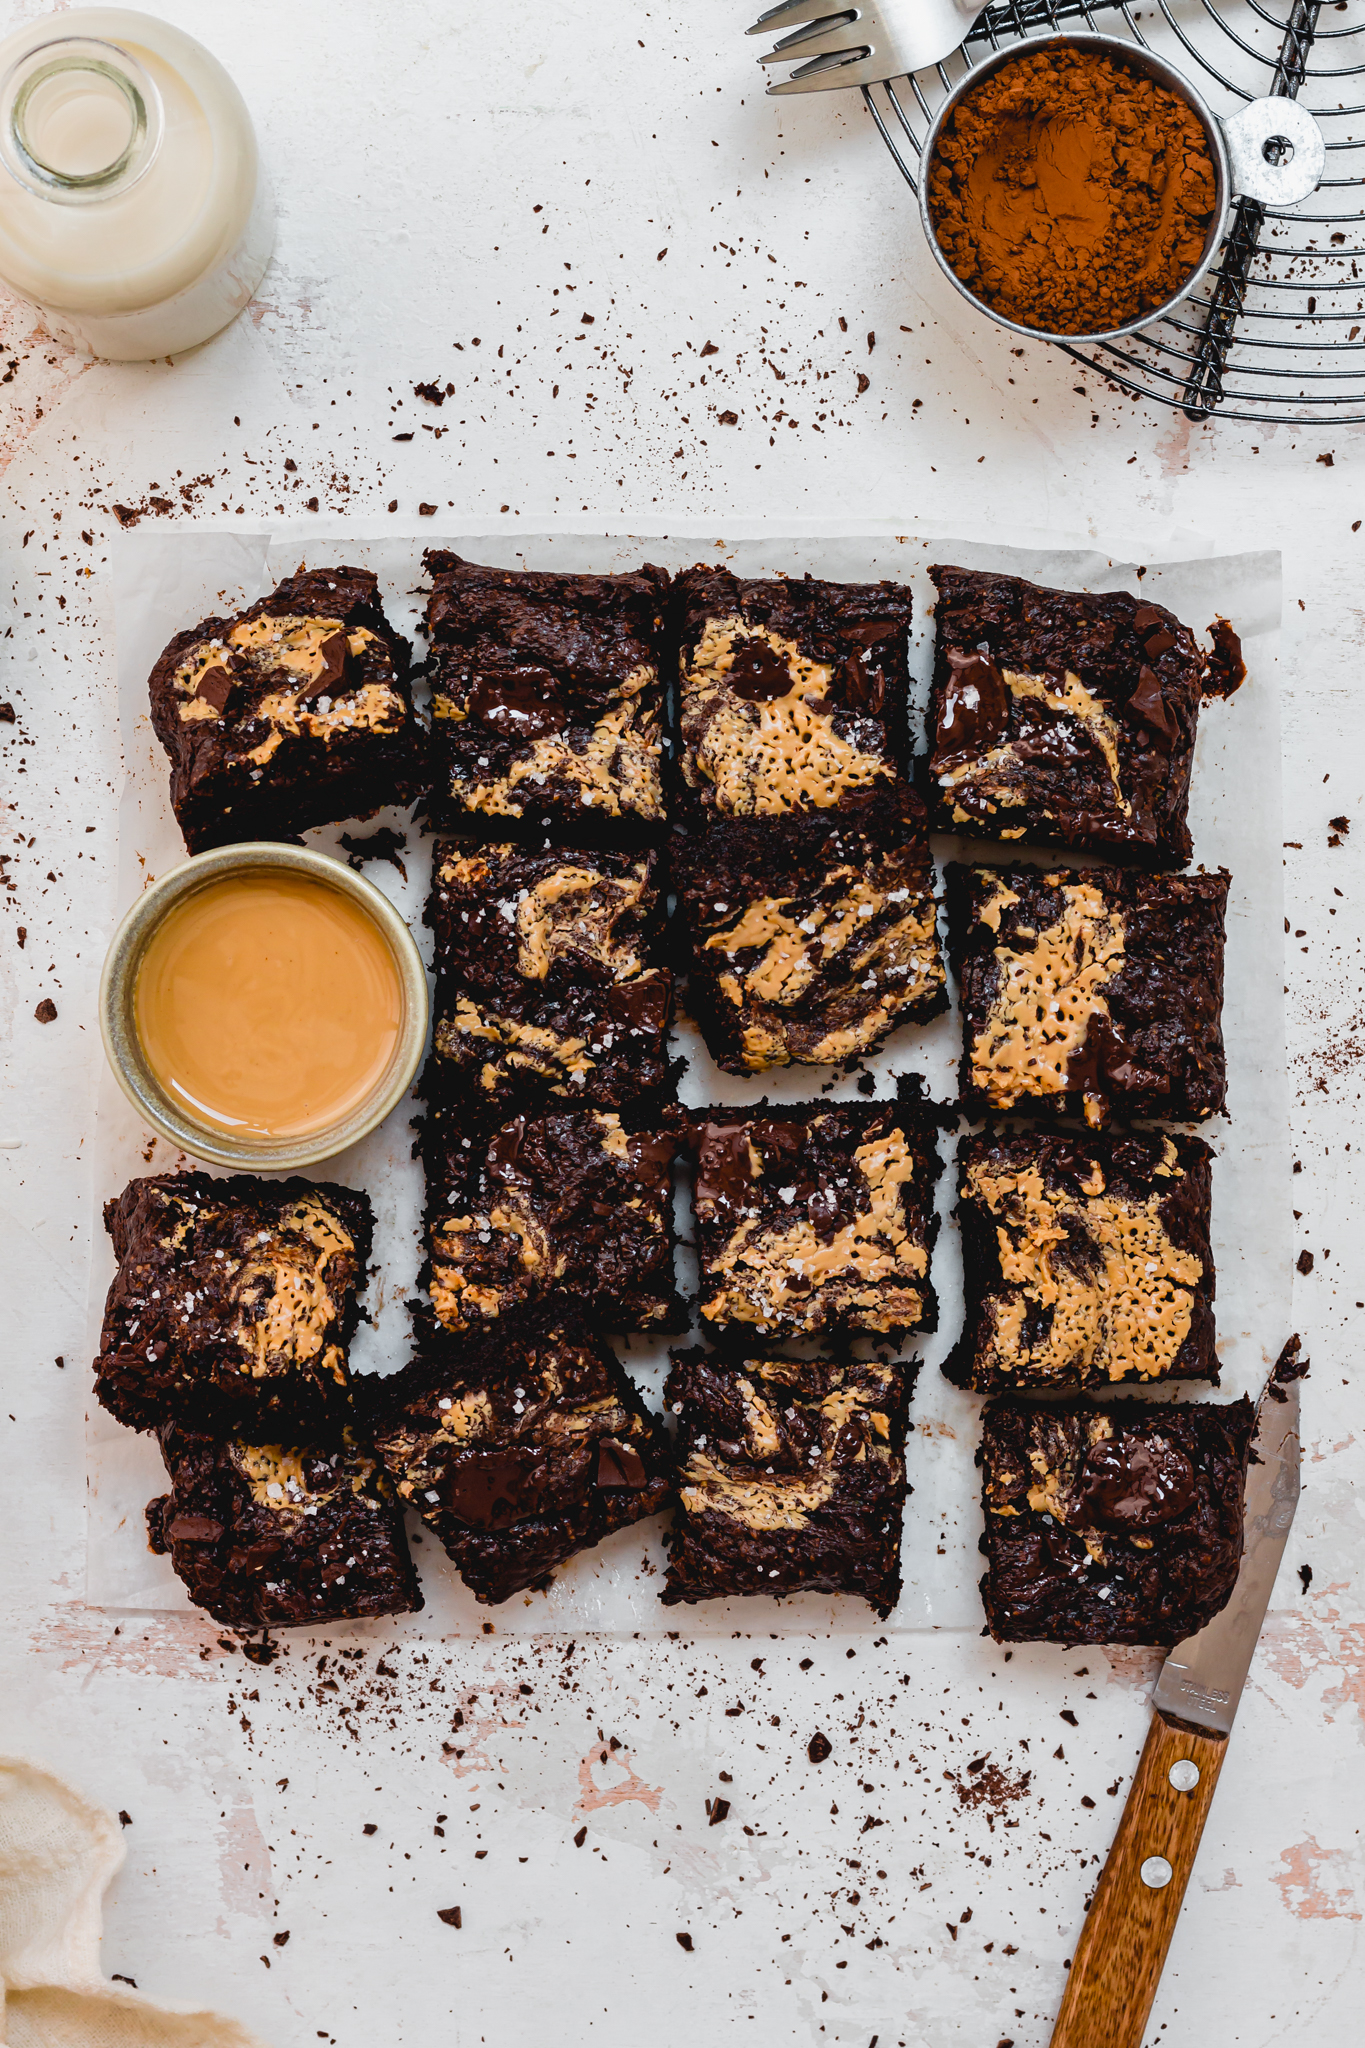 Chocolate Courgette Fudge Brownies on a board cut into 16